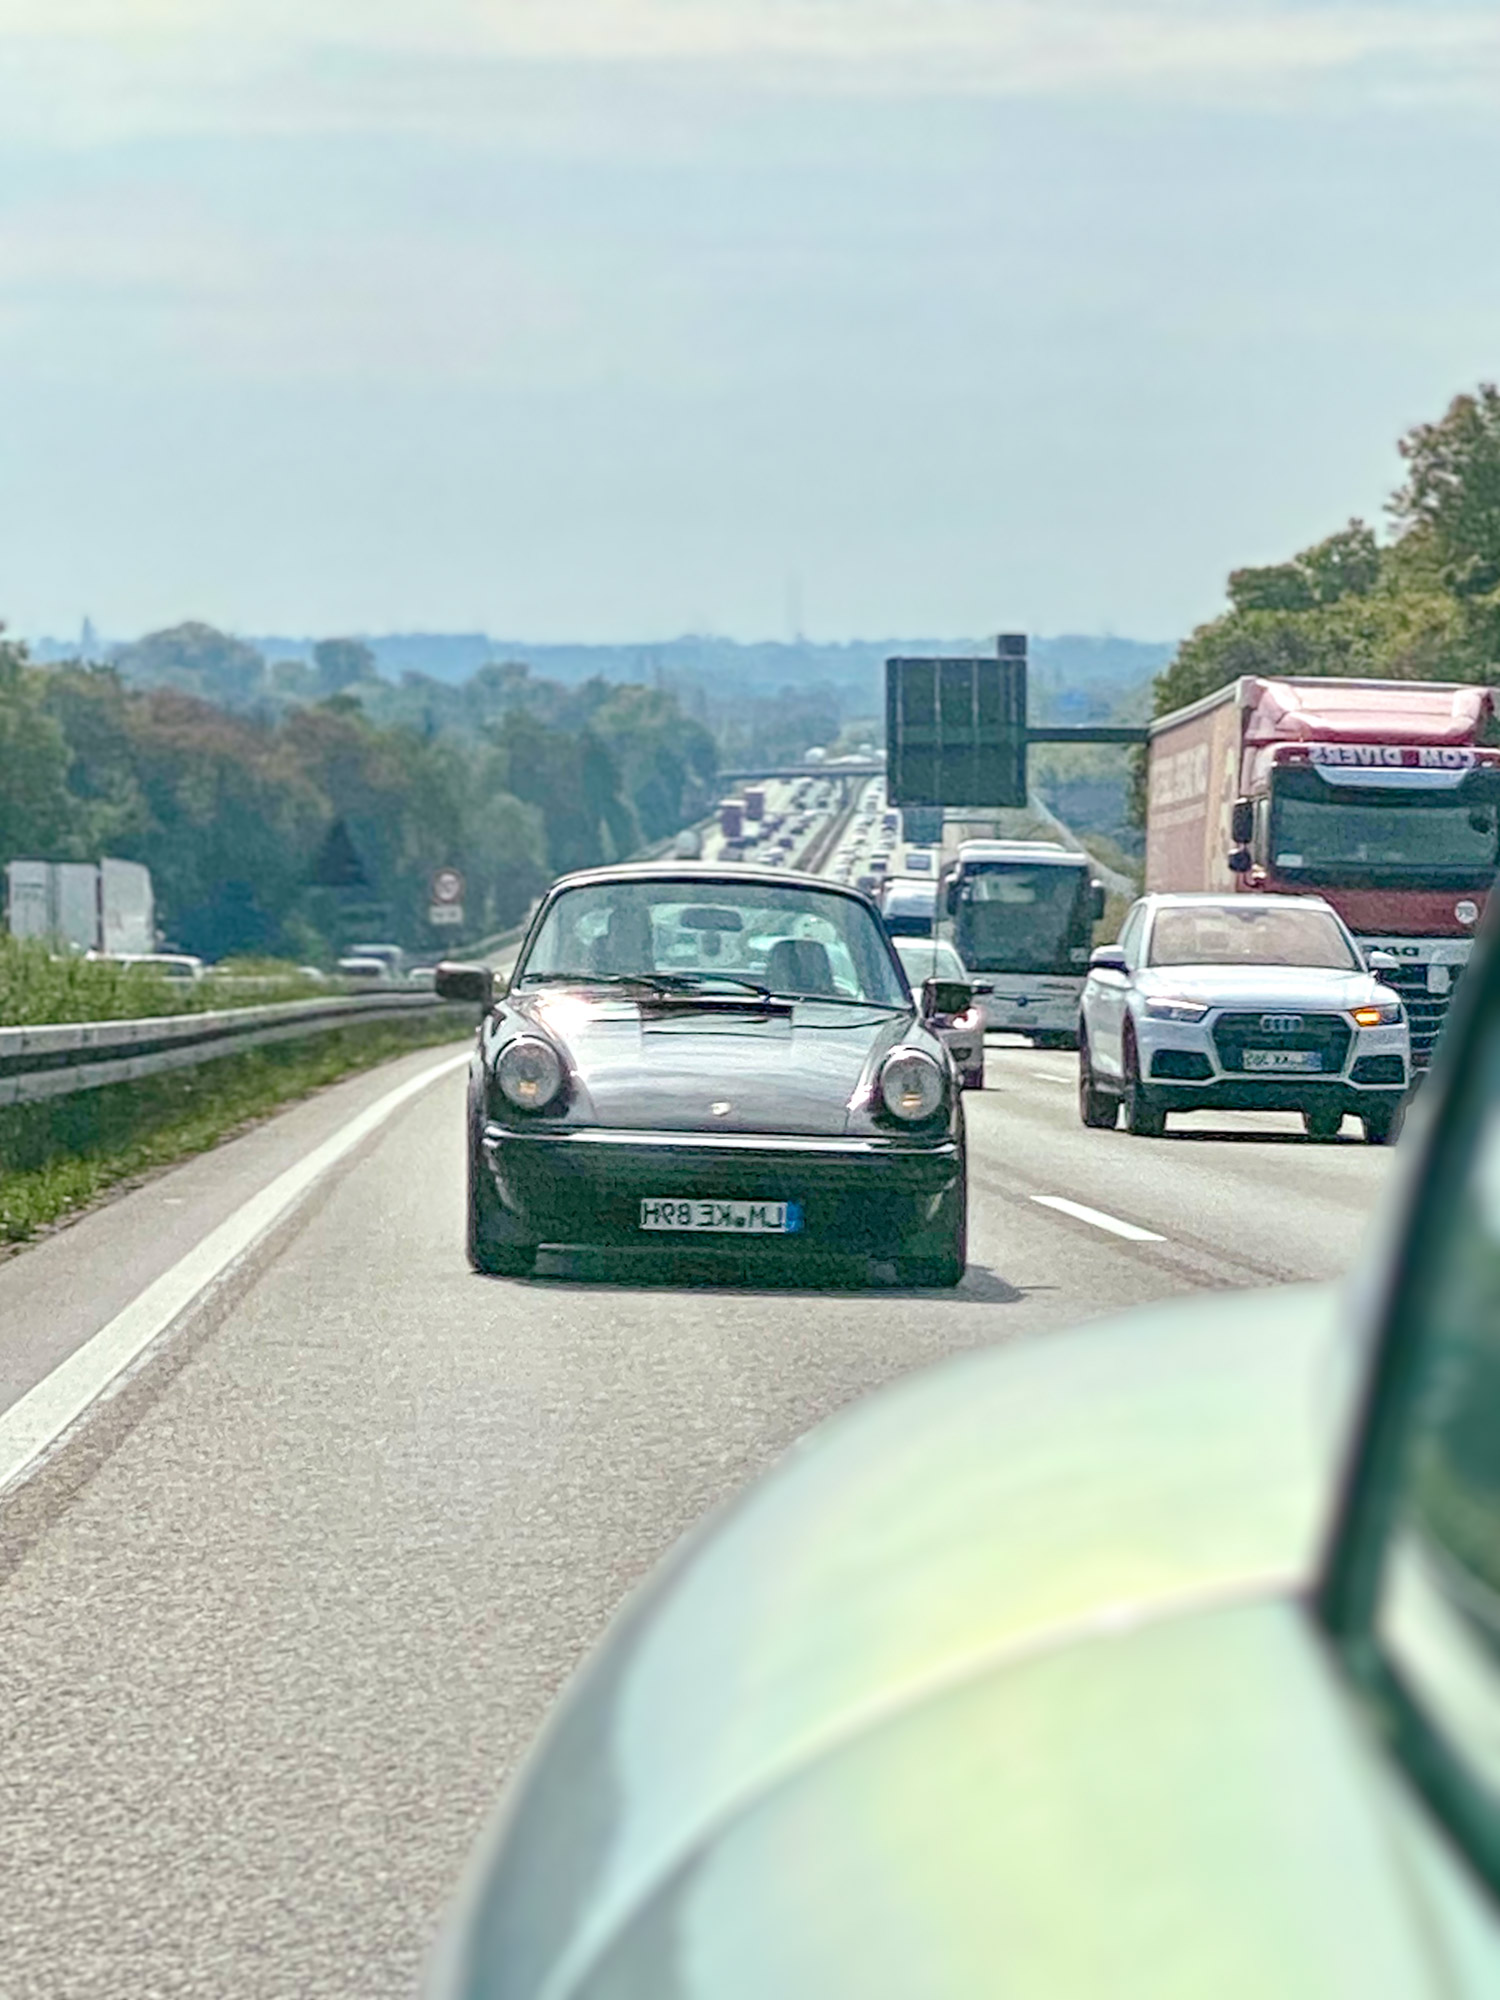 A Classic Porsche 911 tags along in the TVR Tour on the Autobahn